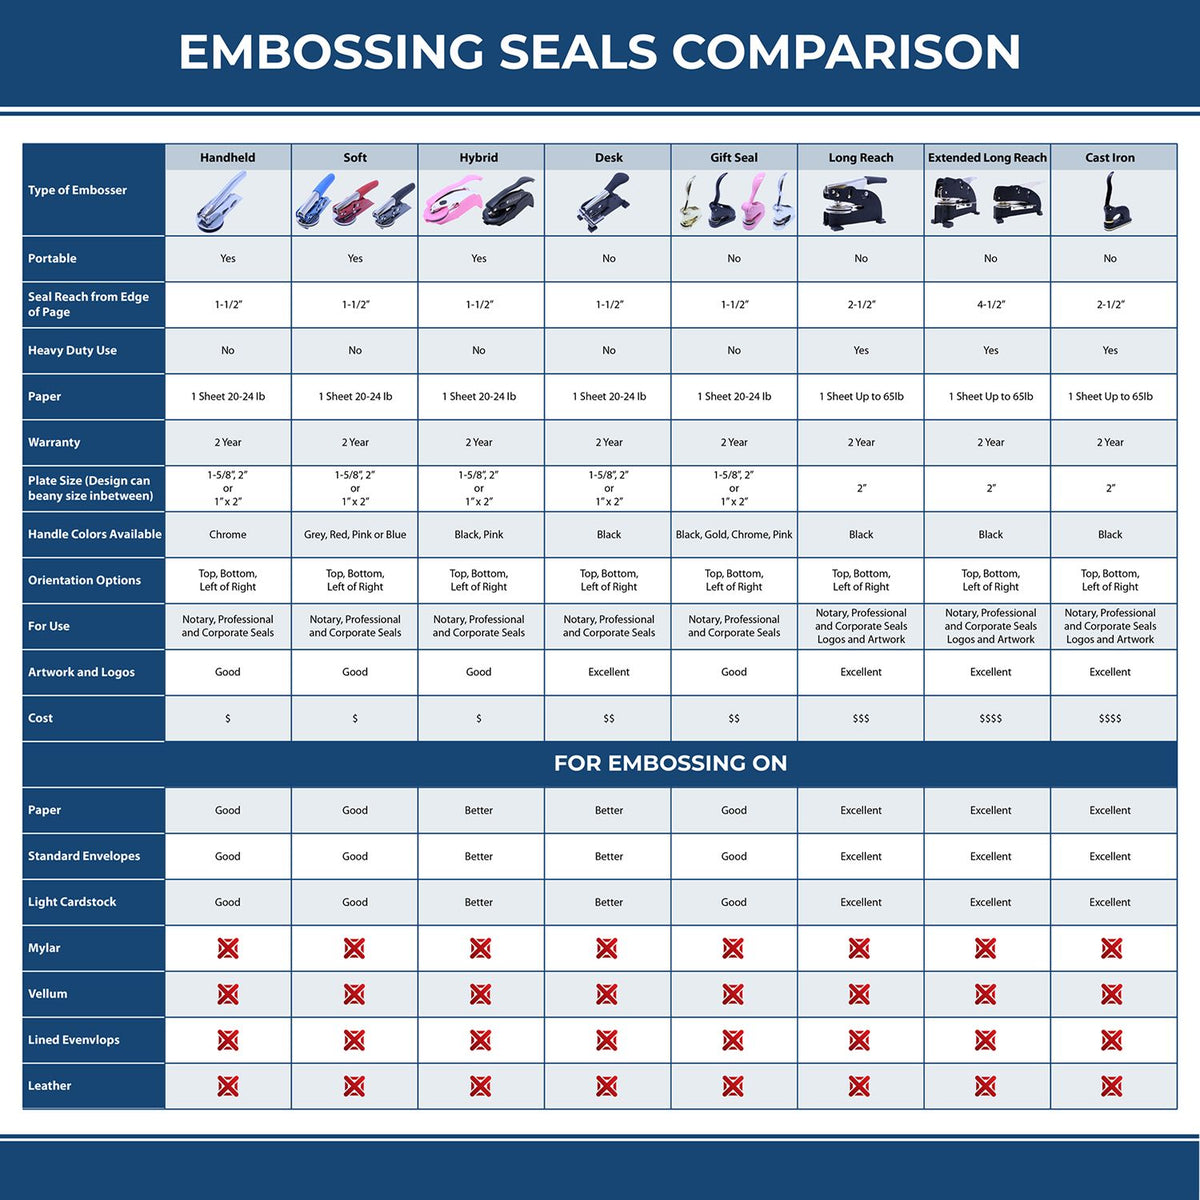 A comparison chart for the different types of mount models available for the State of South Carolina Soft Land Surveyor Embossing Seal.